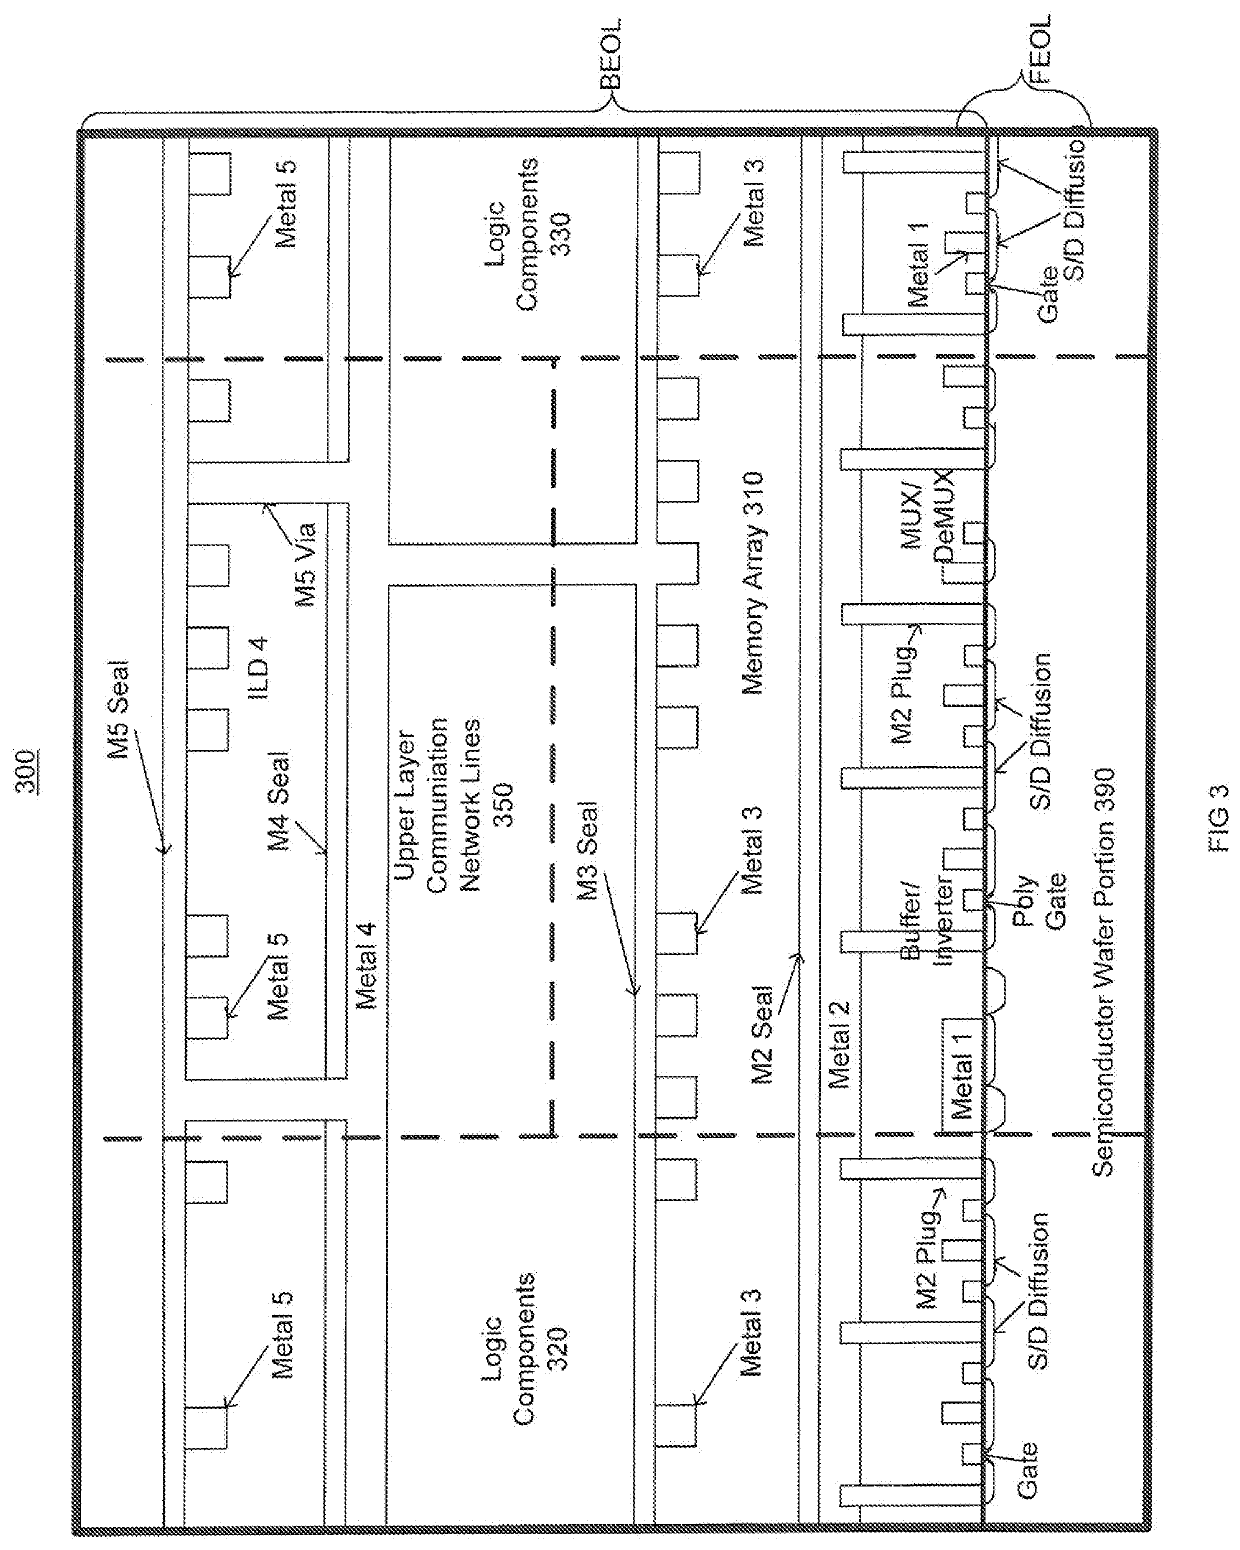 Memory interconnection architecture systems and methods